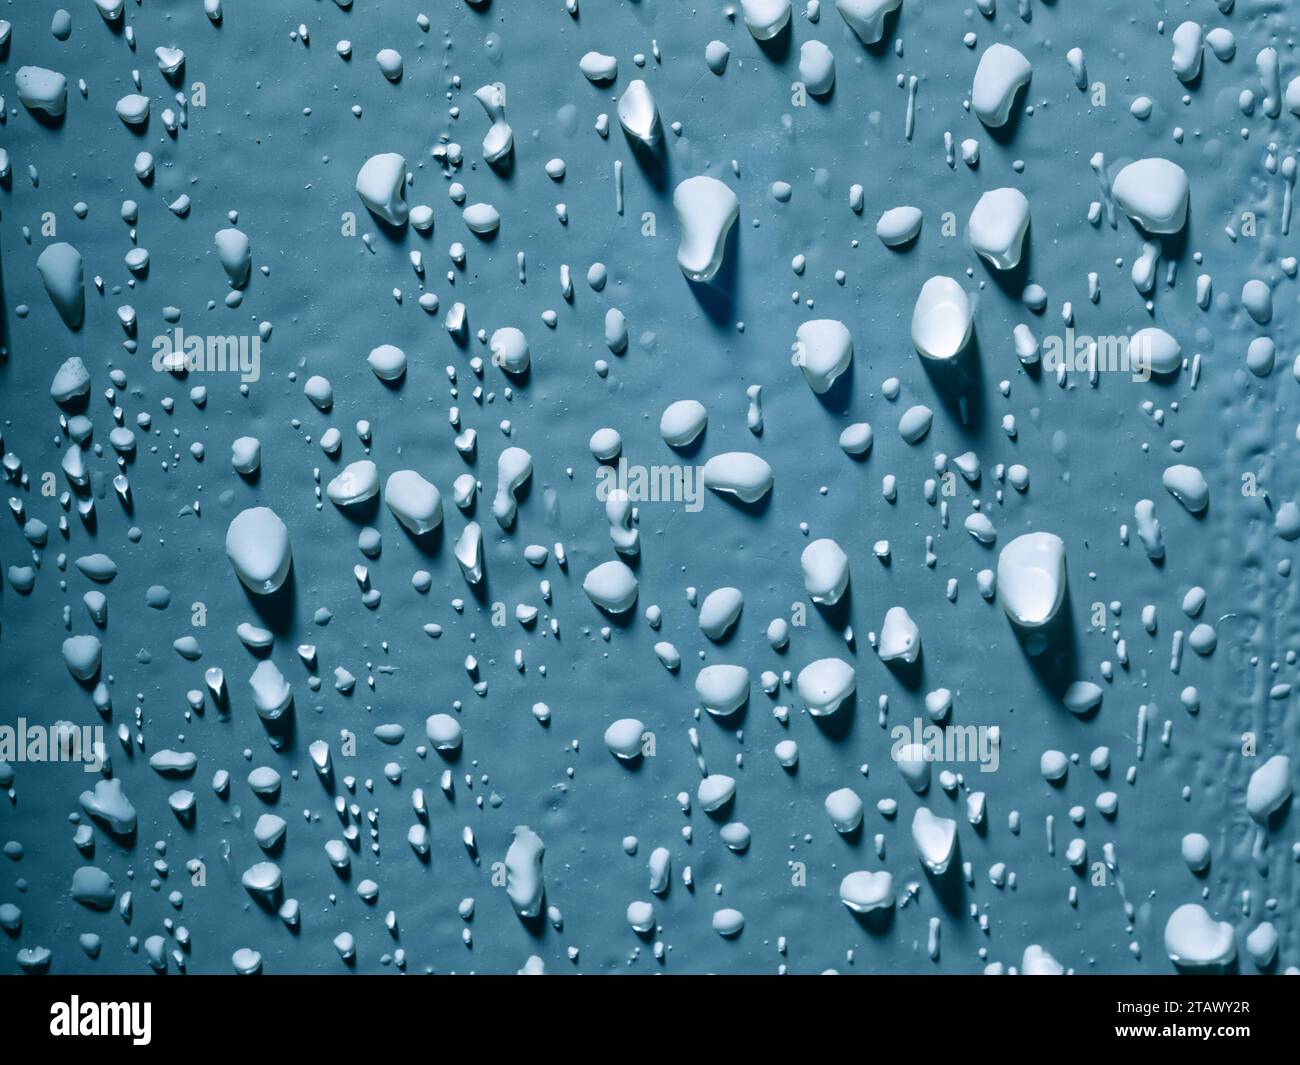 Water droplets against blue background Stock Photo